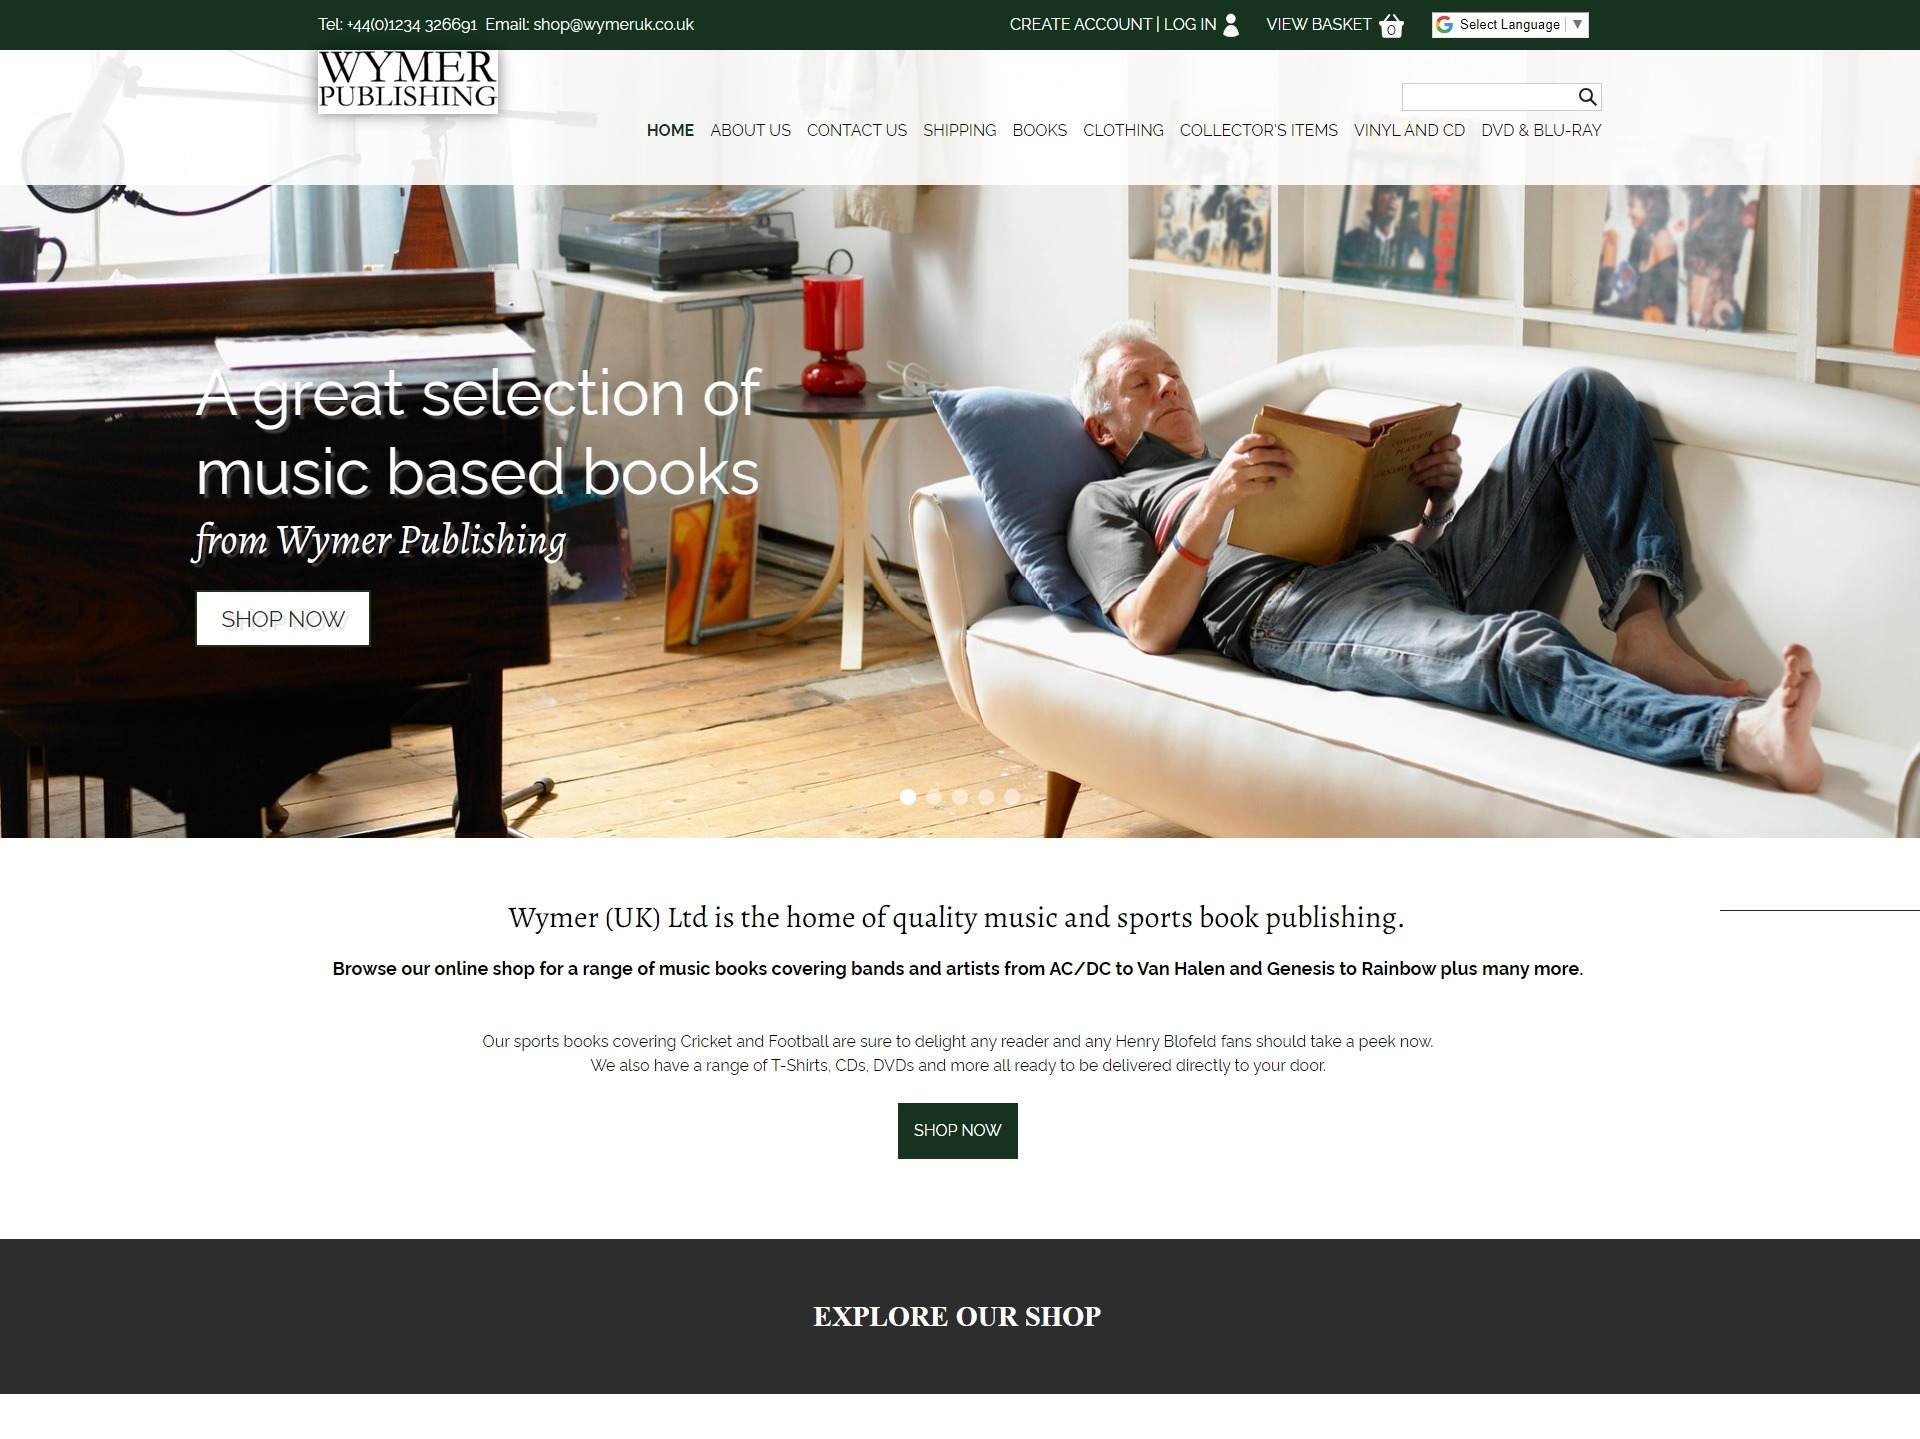 The redesign of Wymer Publishing